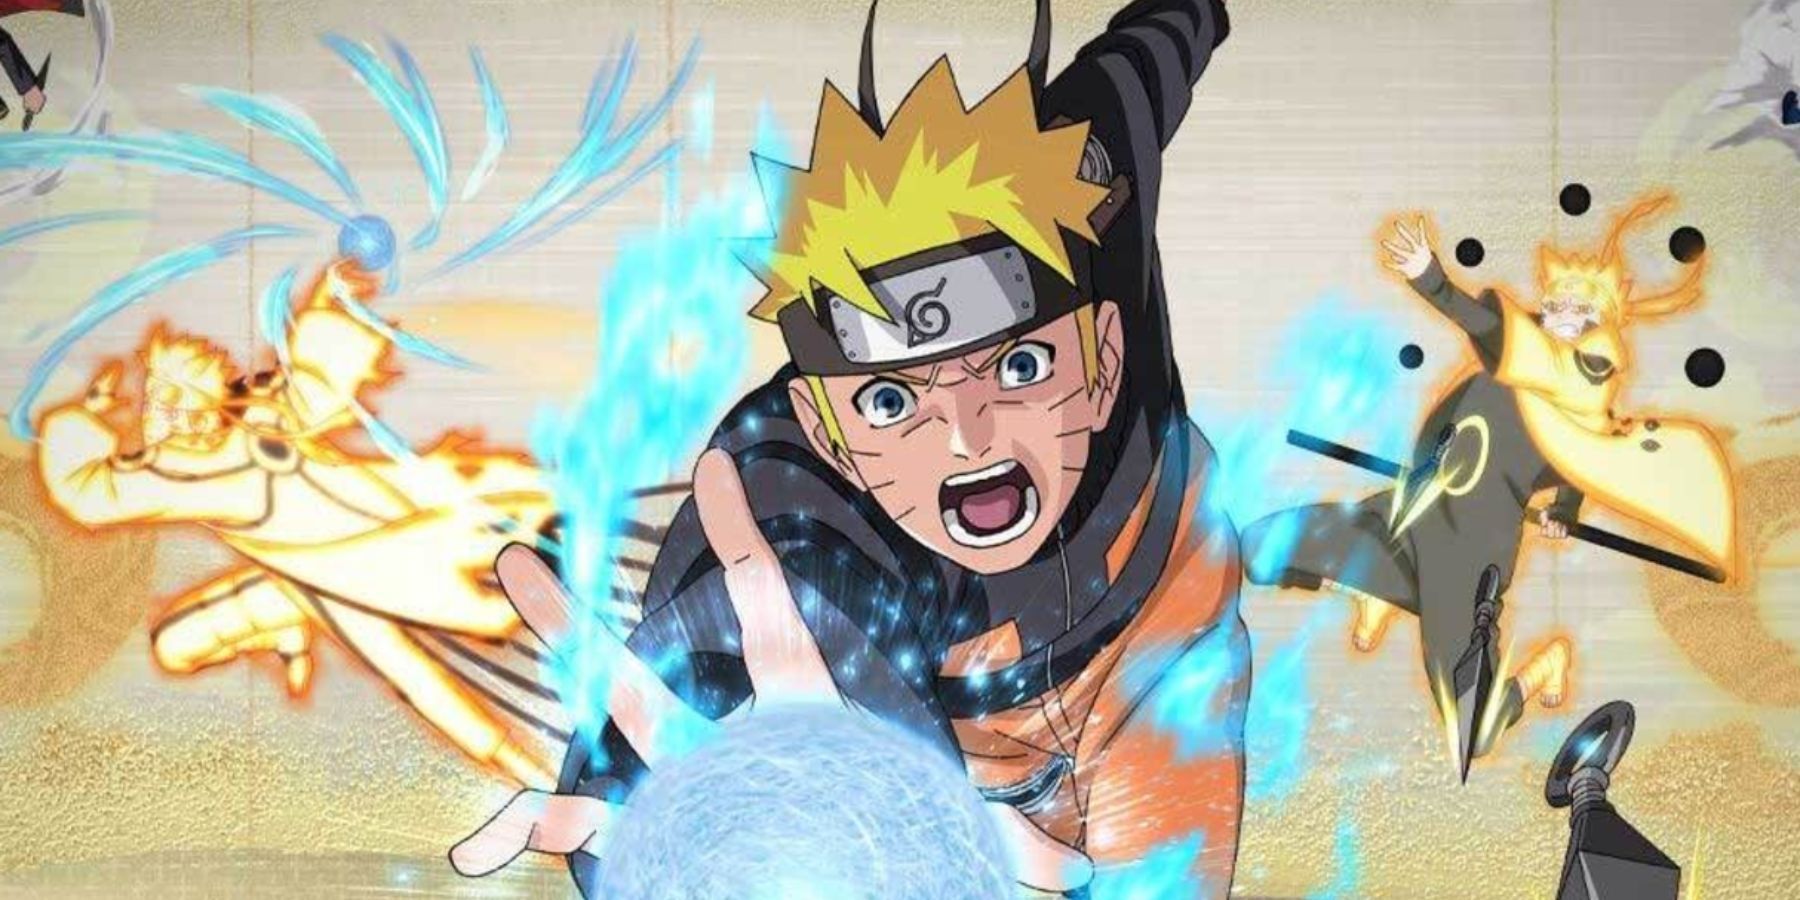 Ninja Storm Connections on X: New Scan for Naruto x Boruto Ultimate Ninja  Storm connections in the V-Jump  / X